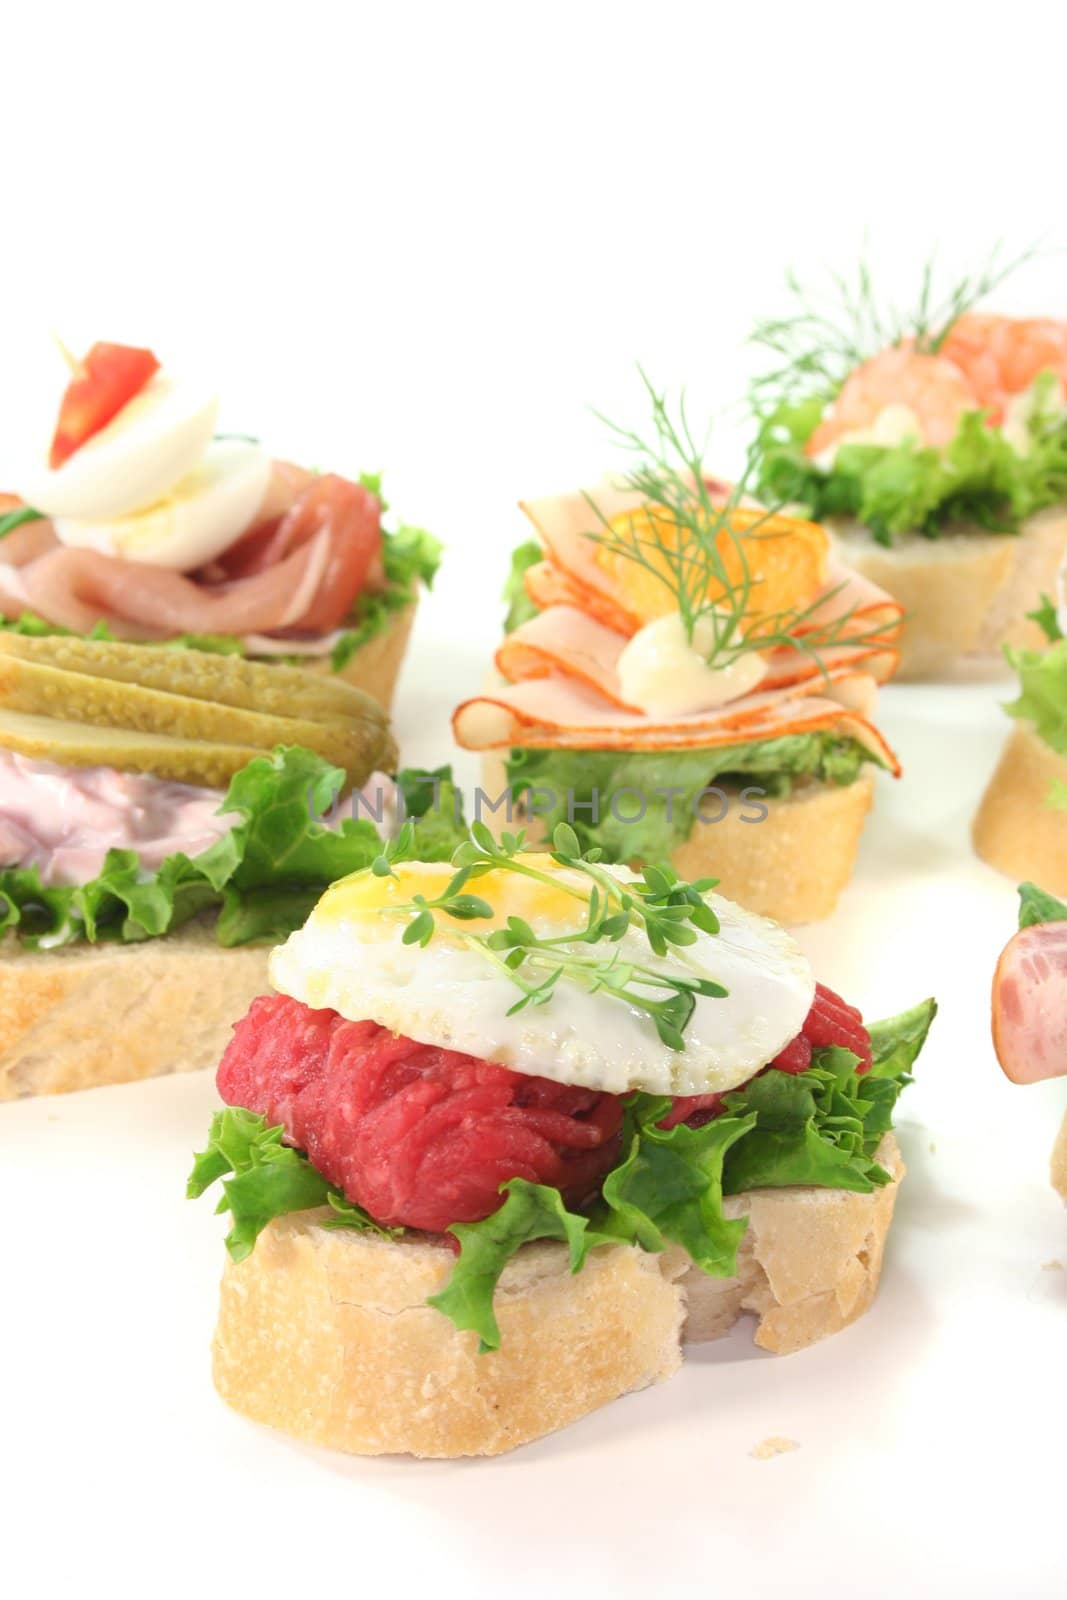 Canape with lettuce, sausages, meat salads, shrimp and quail eggs on a white background